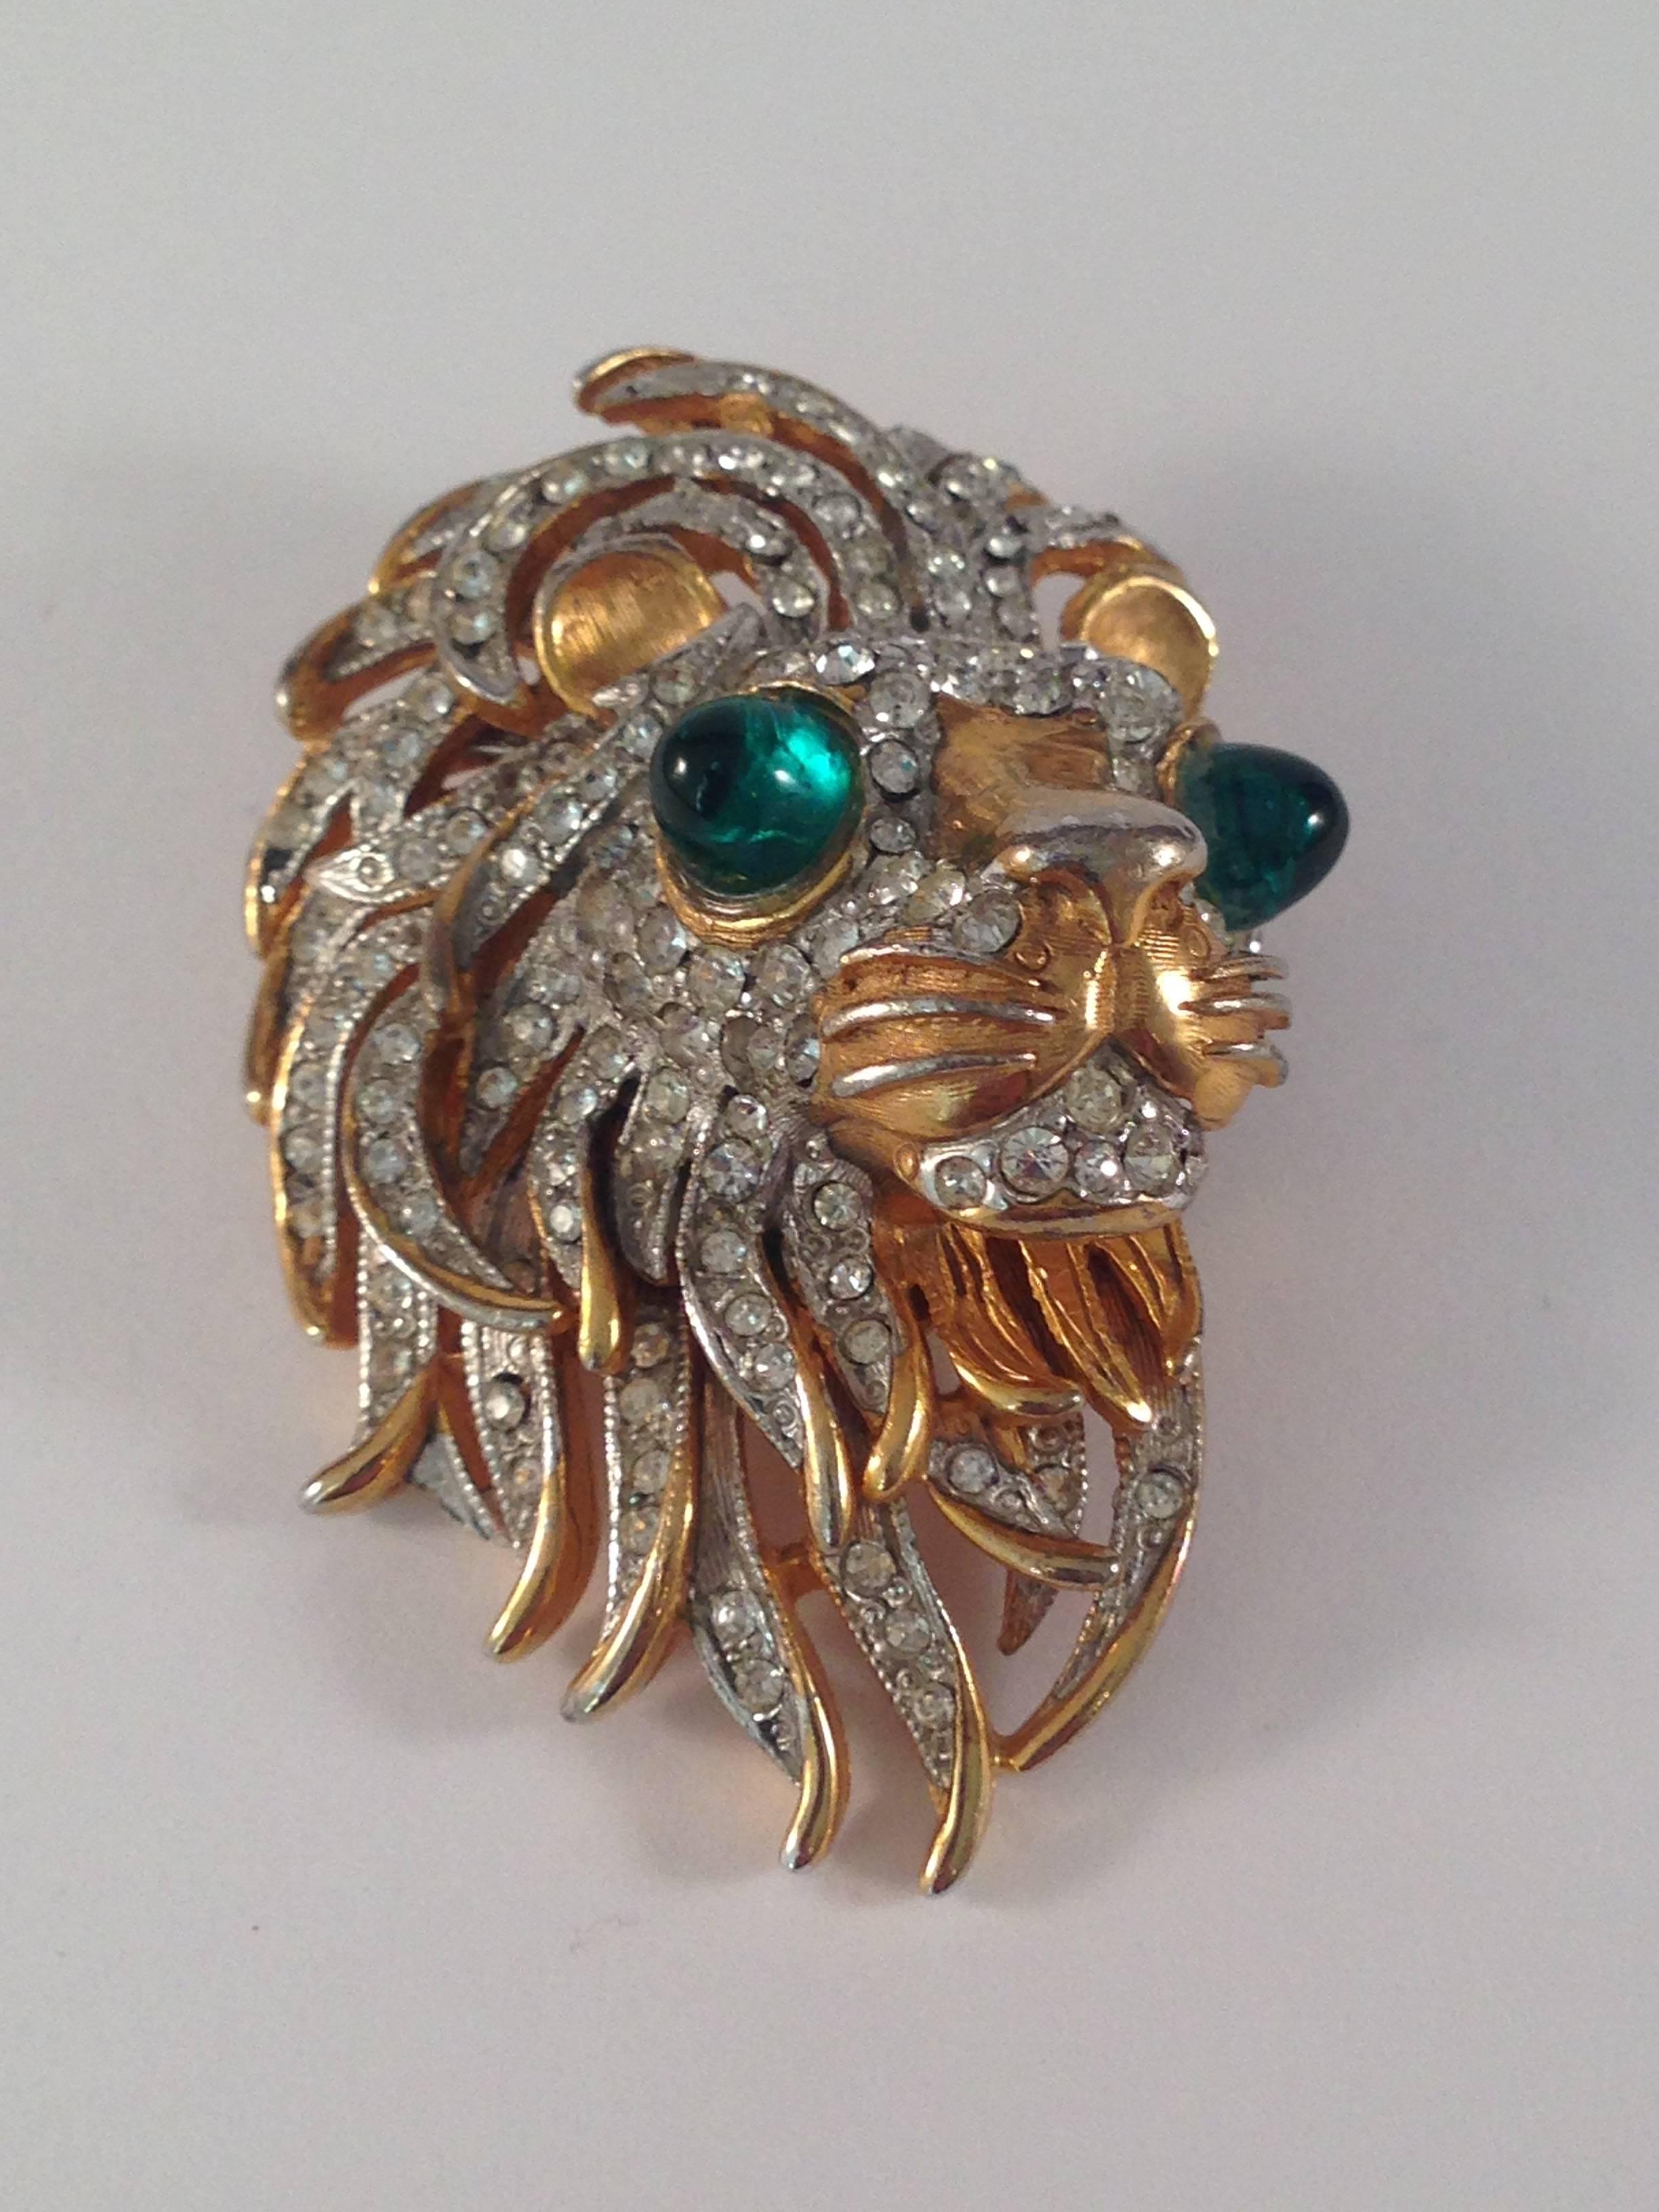 This is a 1960s Kenneth Jay Lane lion or Leo head brooch. It is gold tone metal with clear rhinestones and green glass eyes. It is marked 'K.J.L.' on the back - the signature Lane used in the 1960s. It is in very good vintage condition with slight